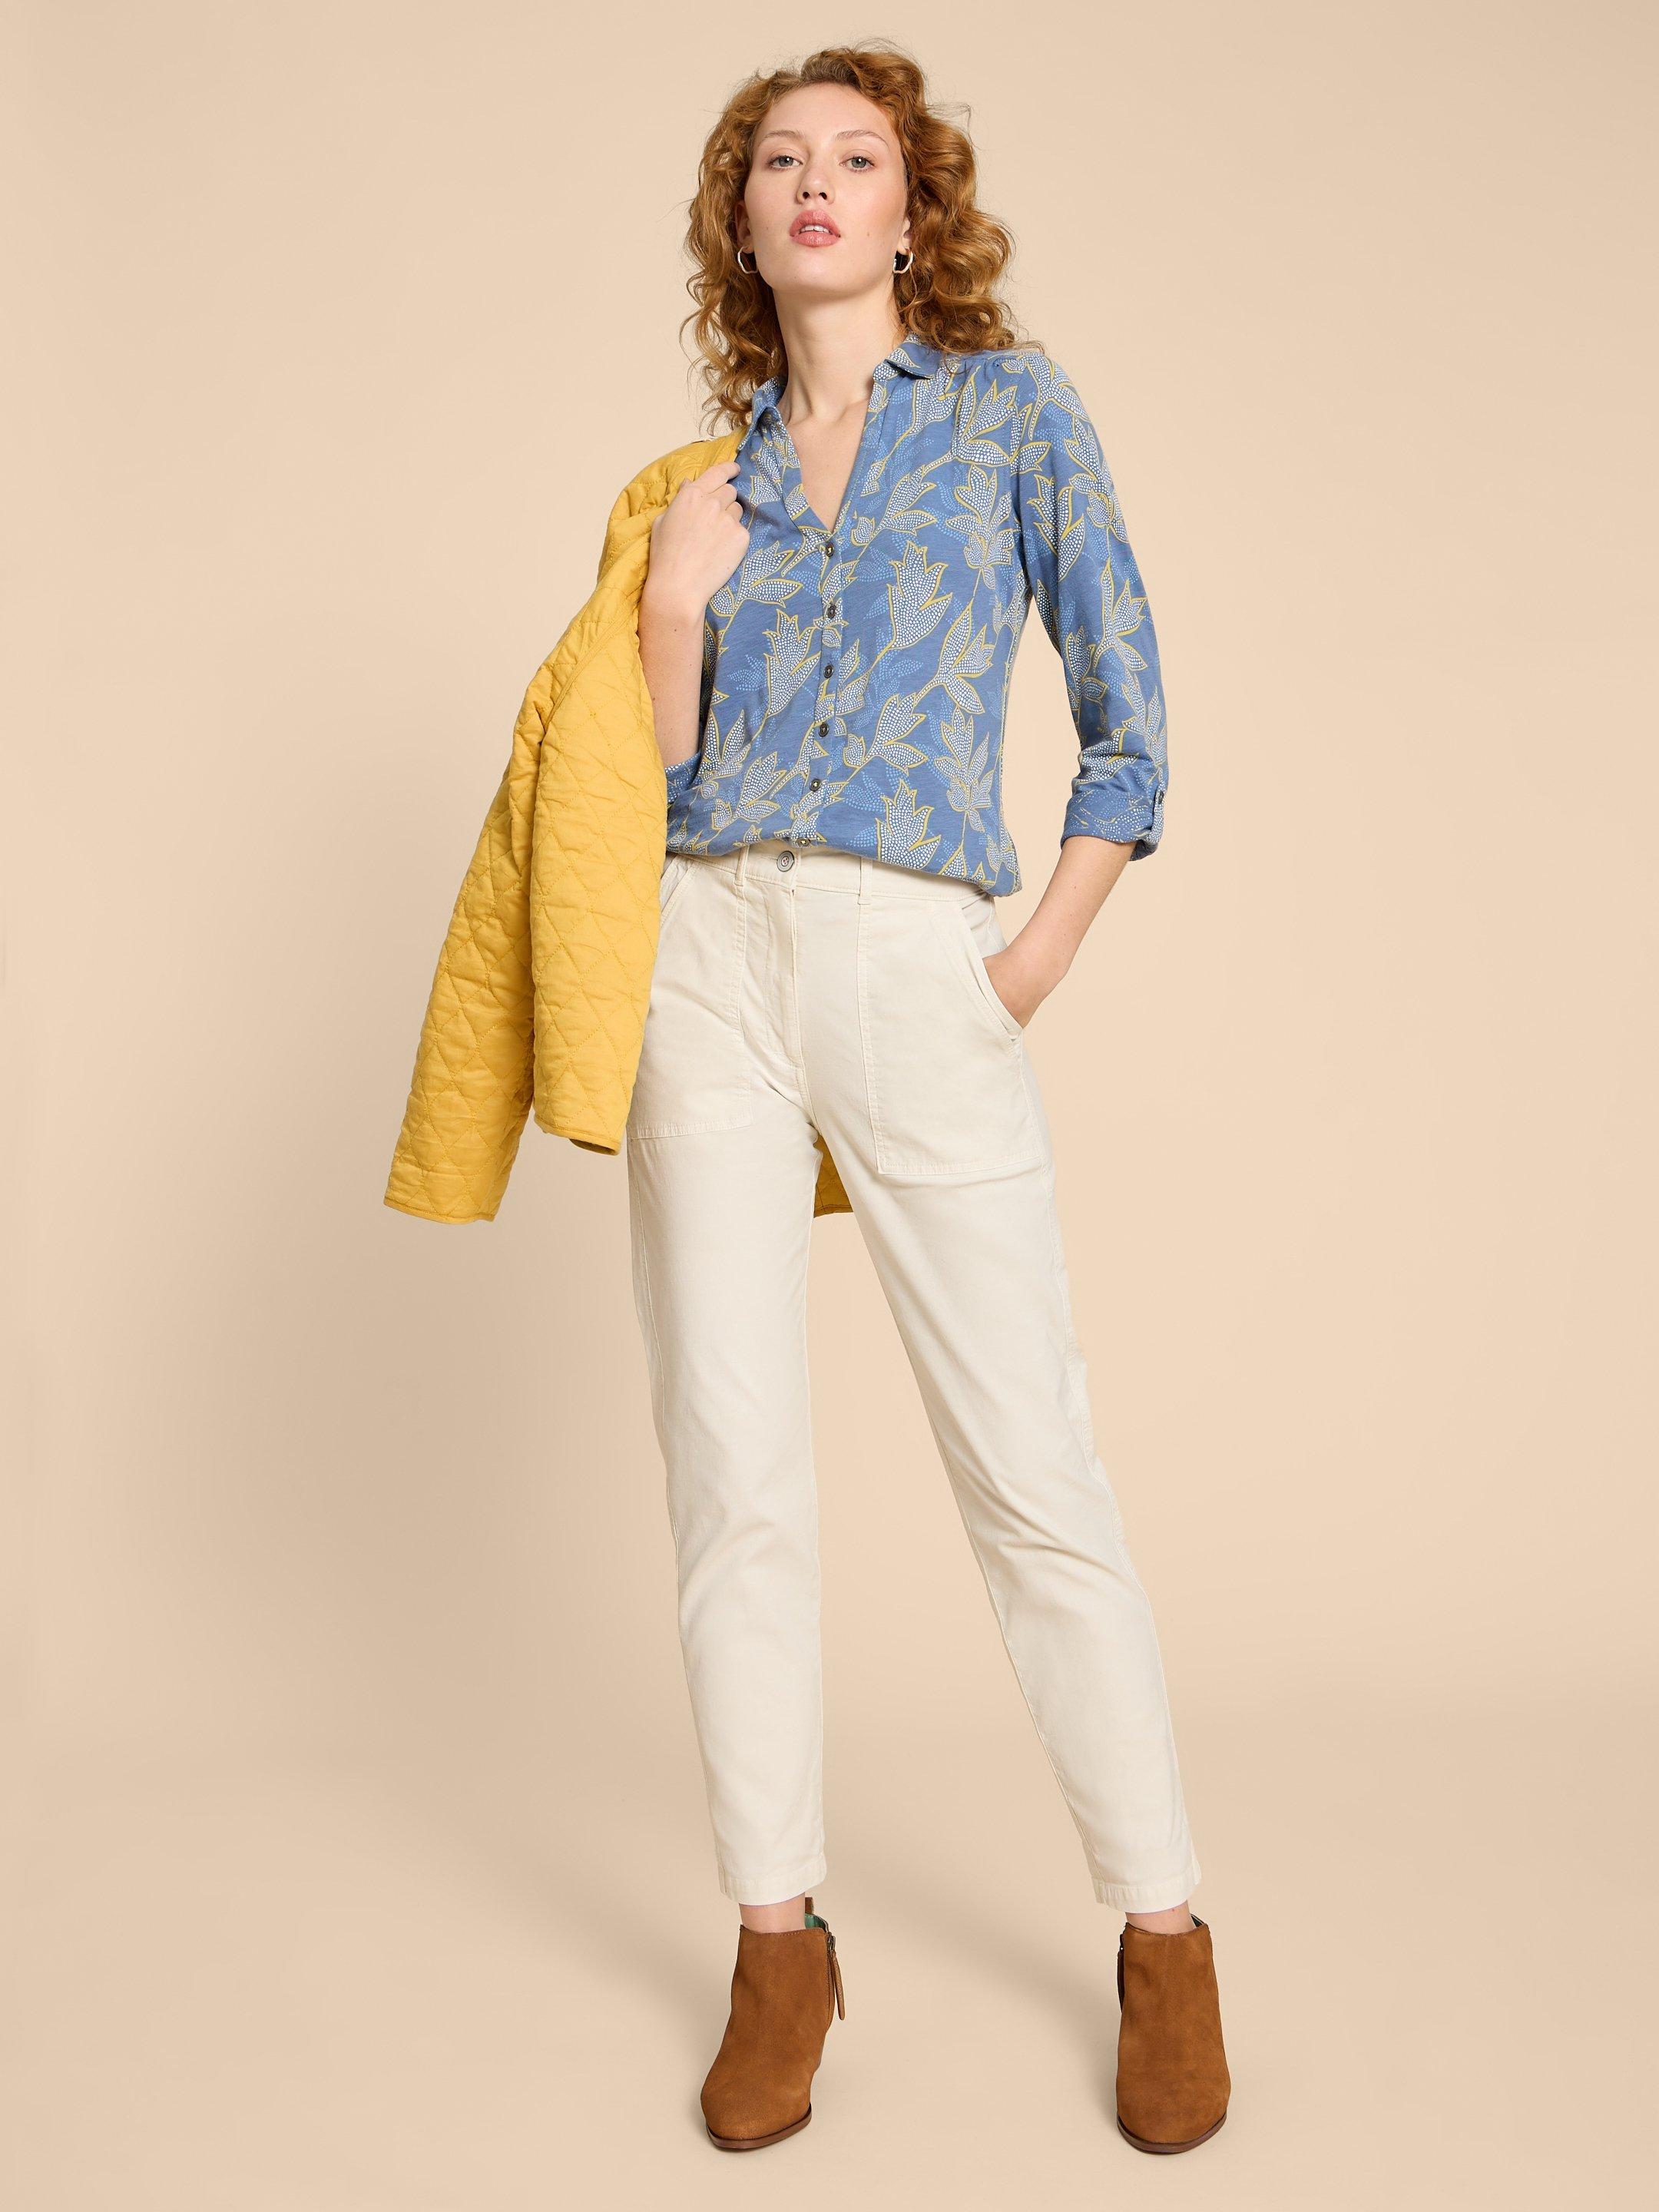 ANNIE PRINTED COTTON SHIRT in BLUE MLT - MODEL FRONT